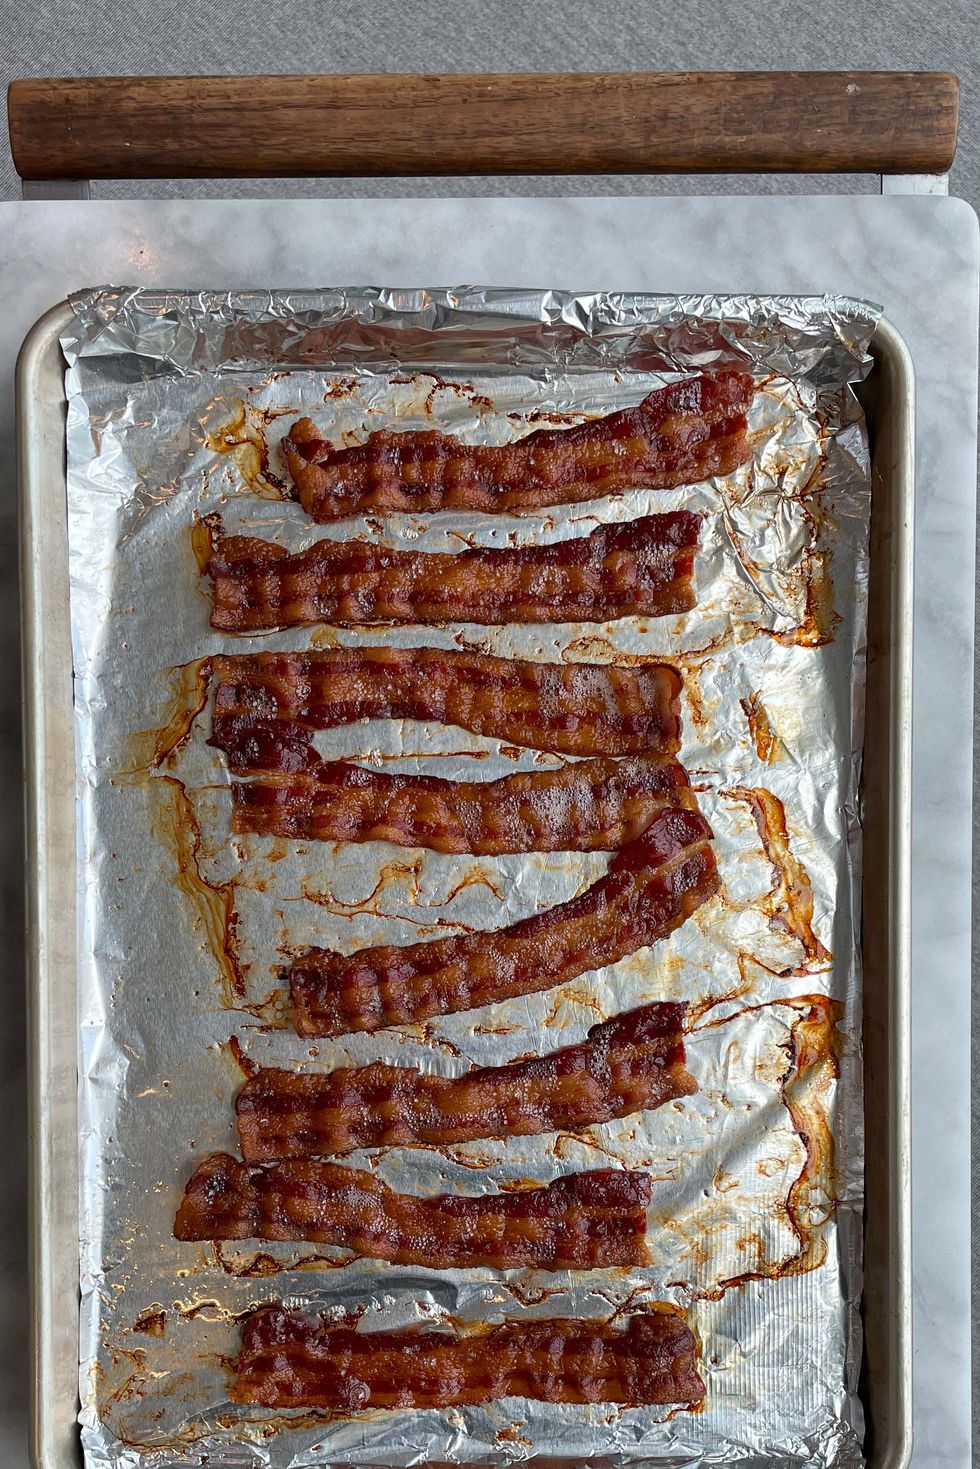 How to Cook Bacon in the Oven - Extra Crispy Bacon in the Oven